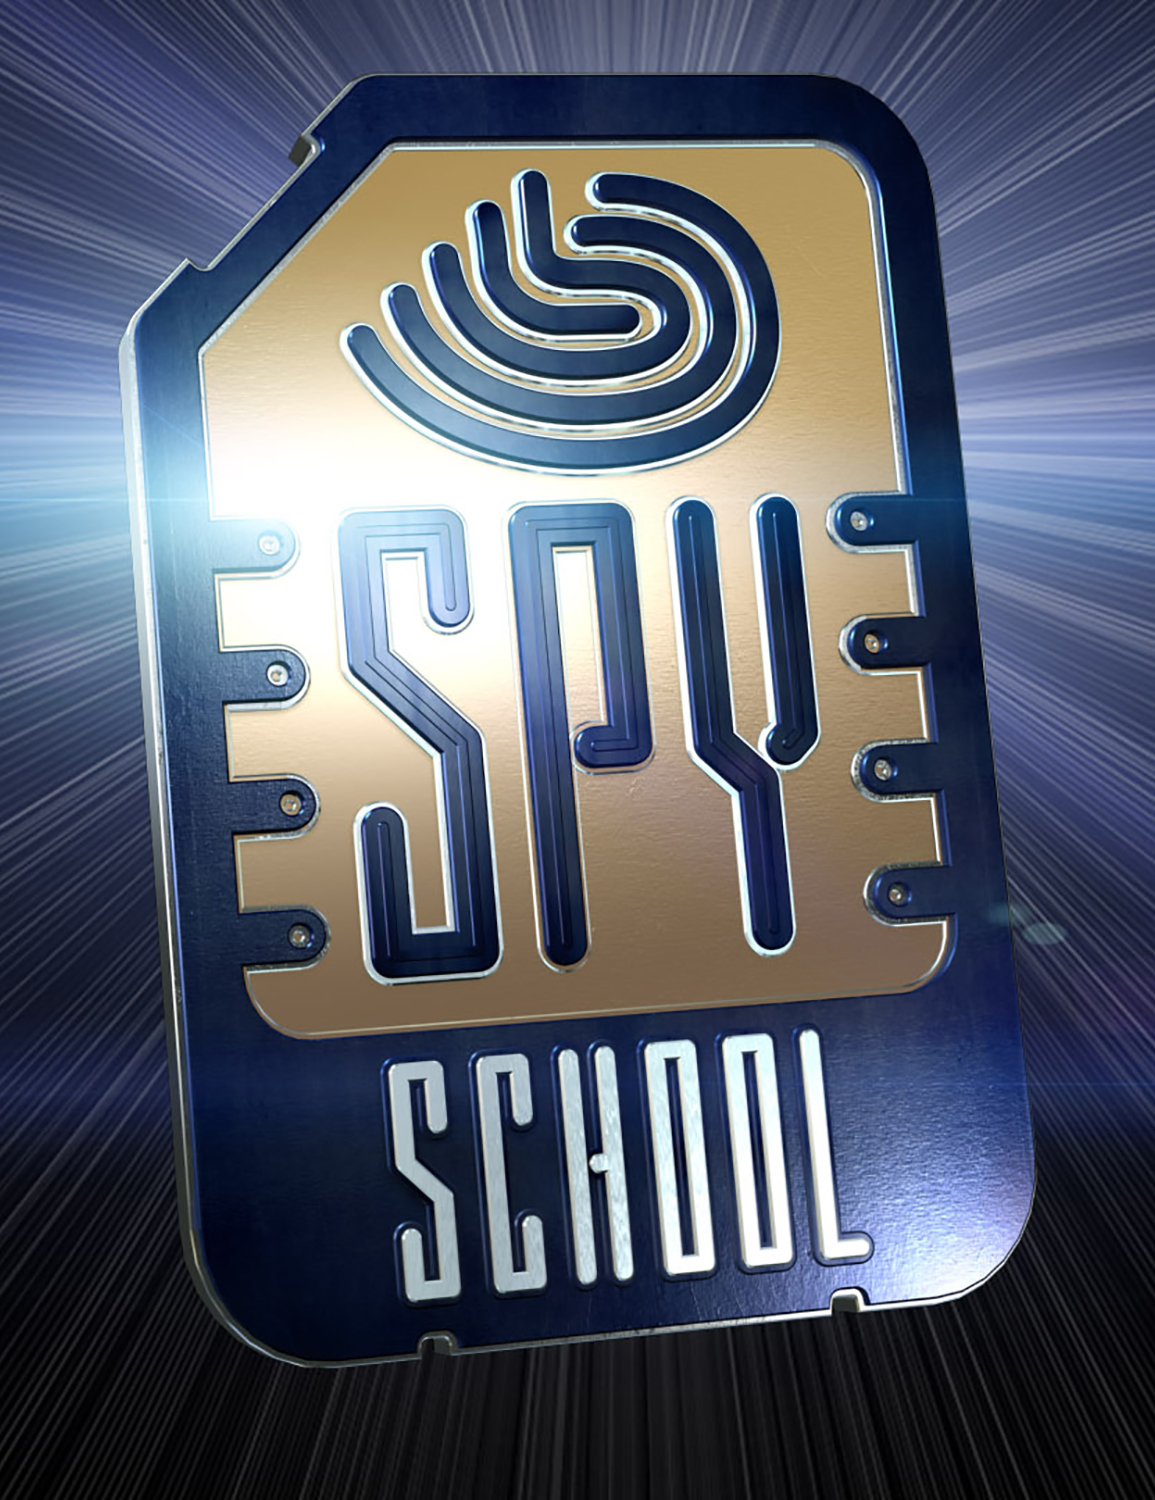 spy-school-where-to-watch-and-stream-tv-guide